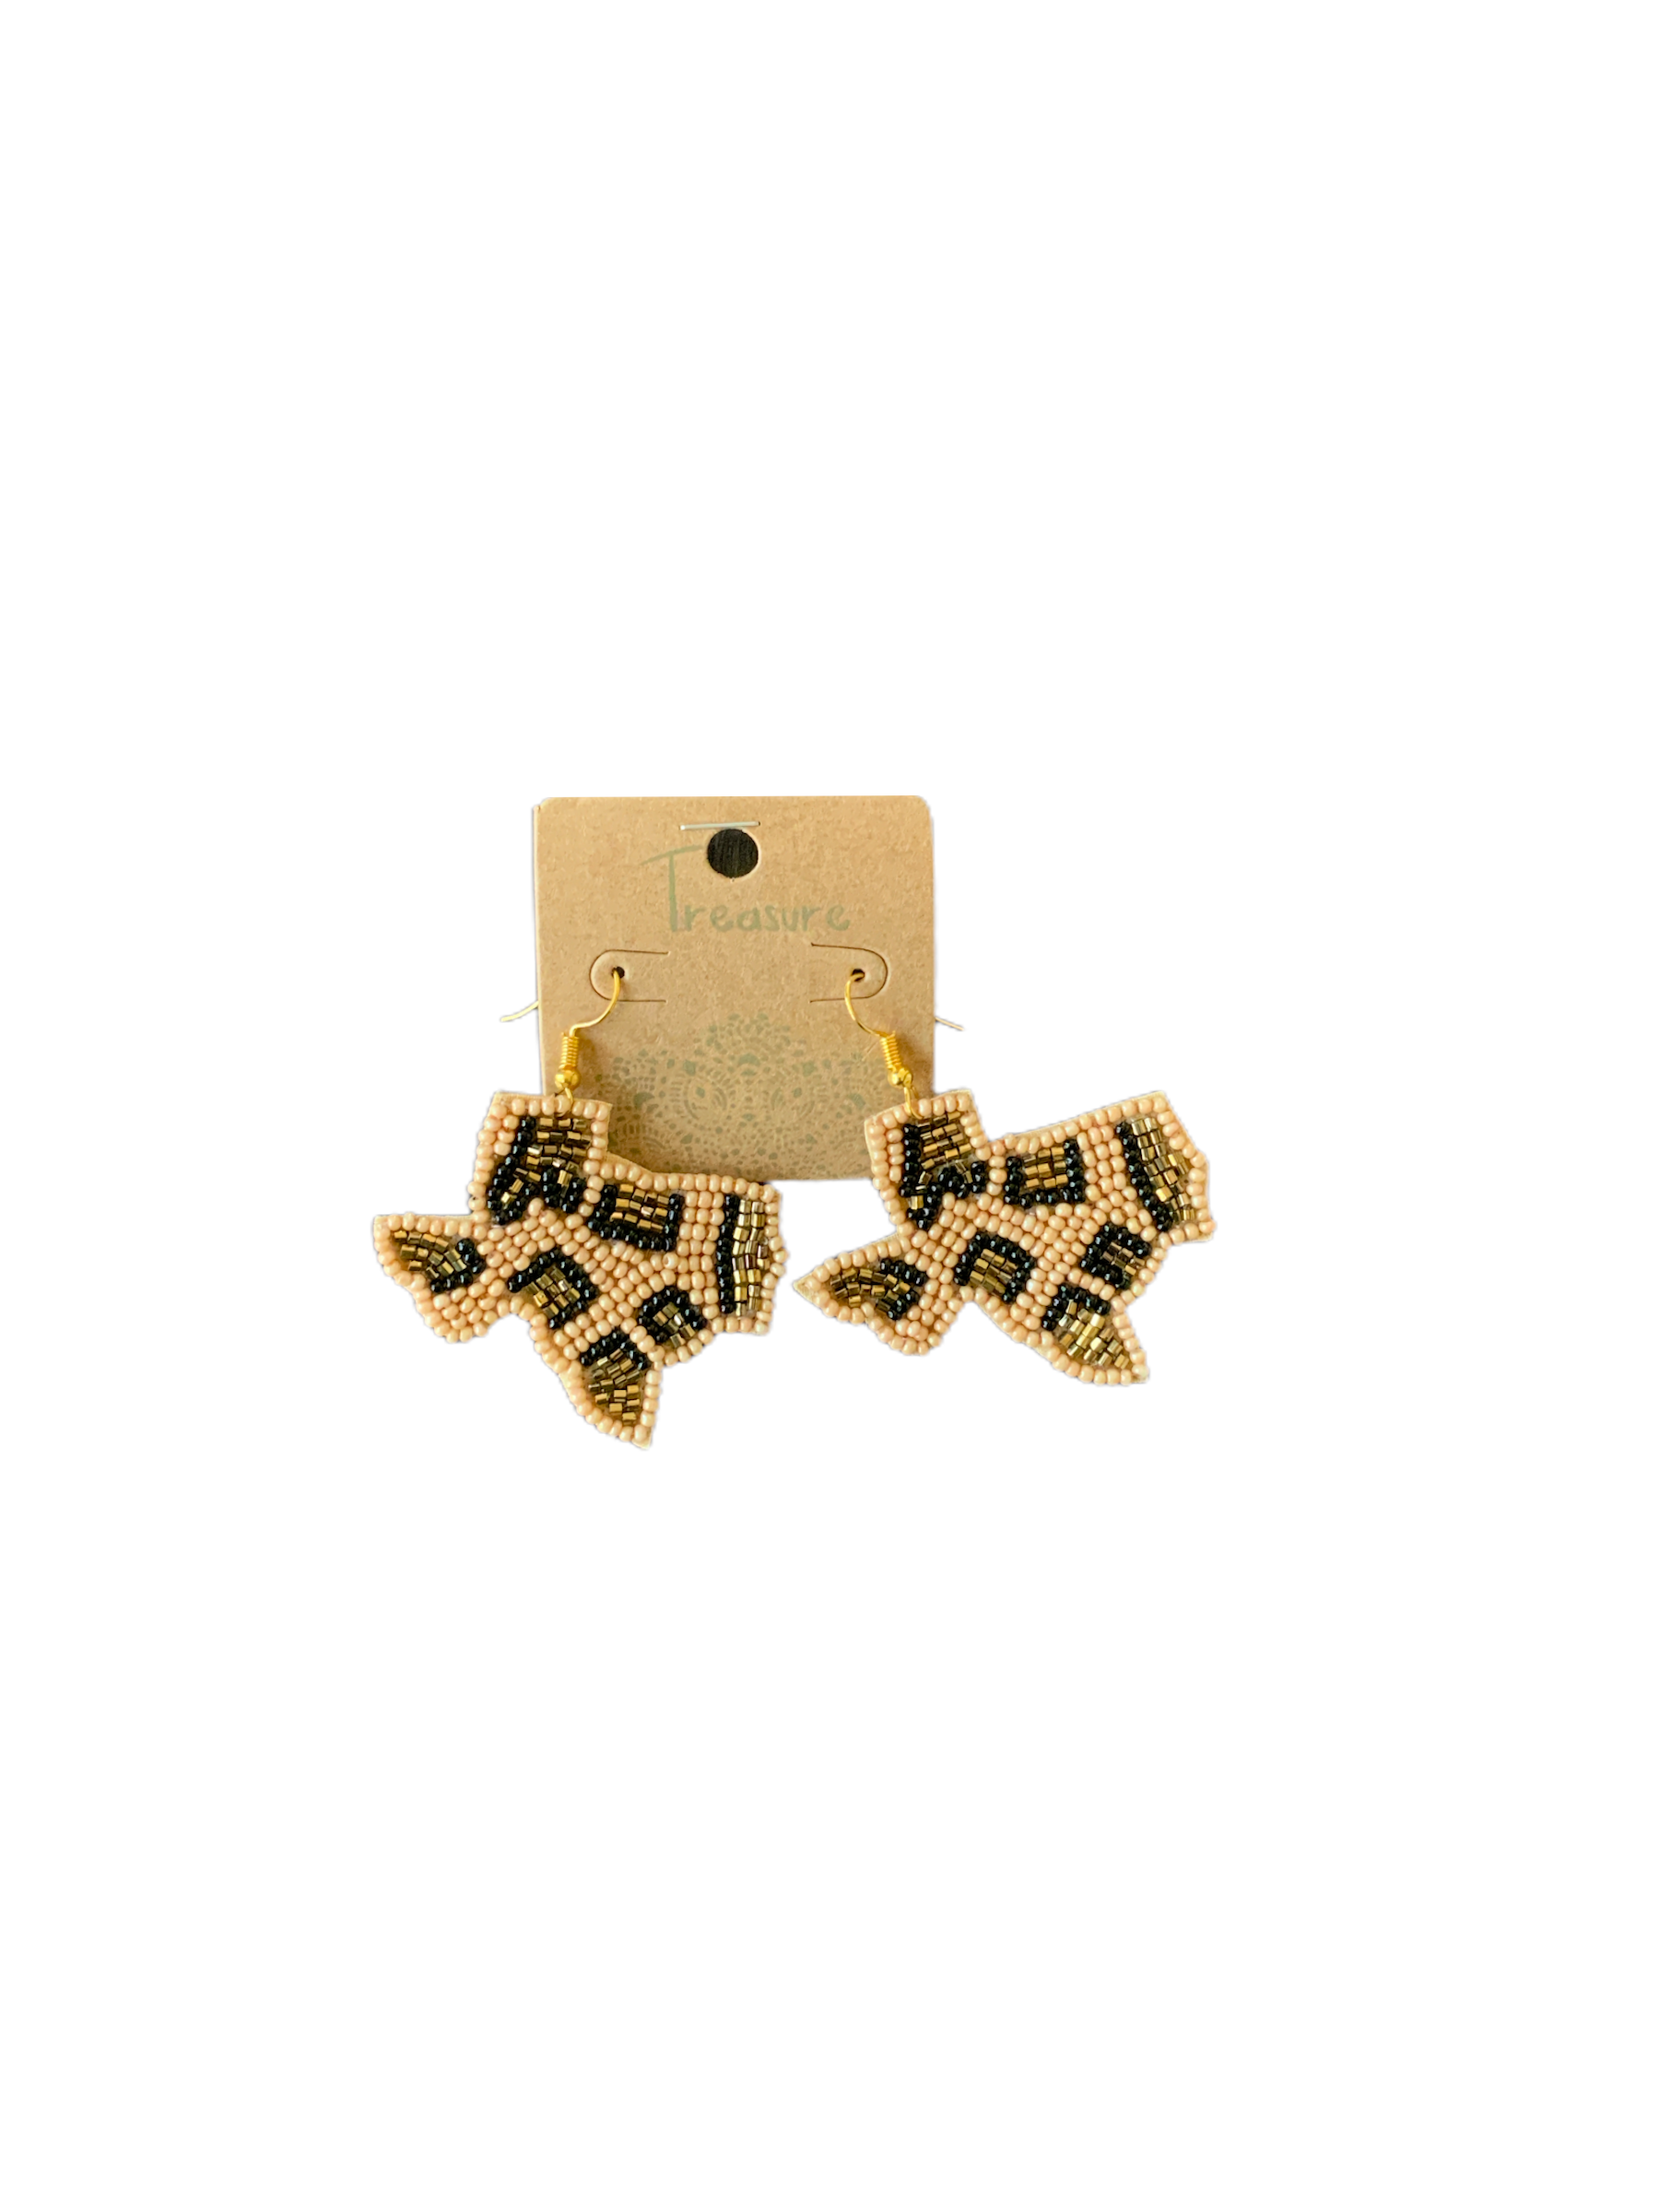 TEXAS LEOPARD EARRINGS - Baby Bums Clothing 